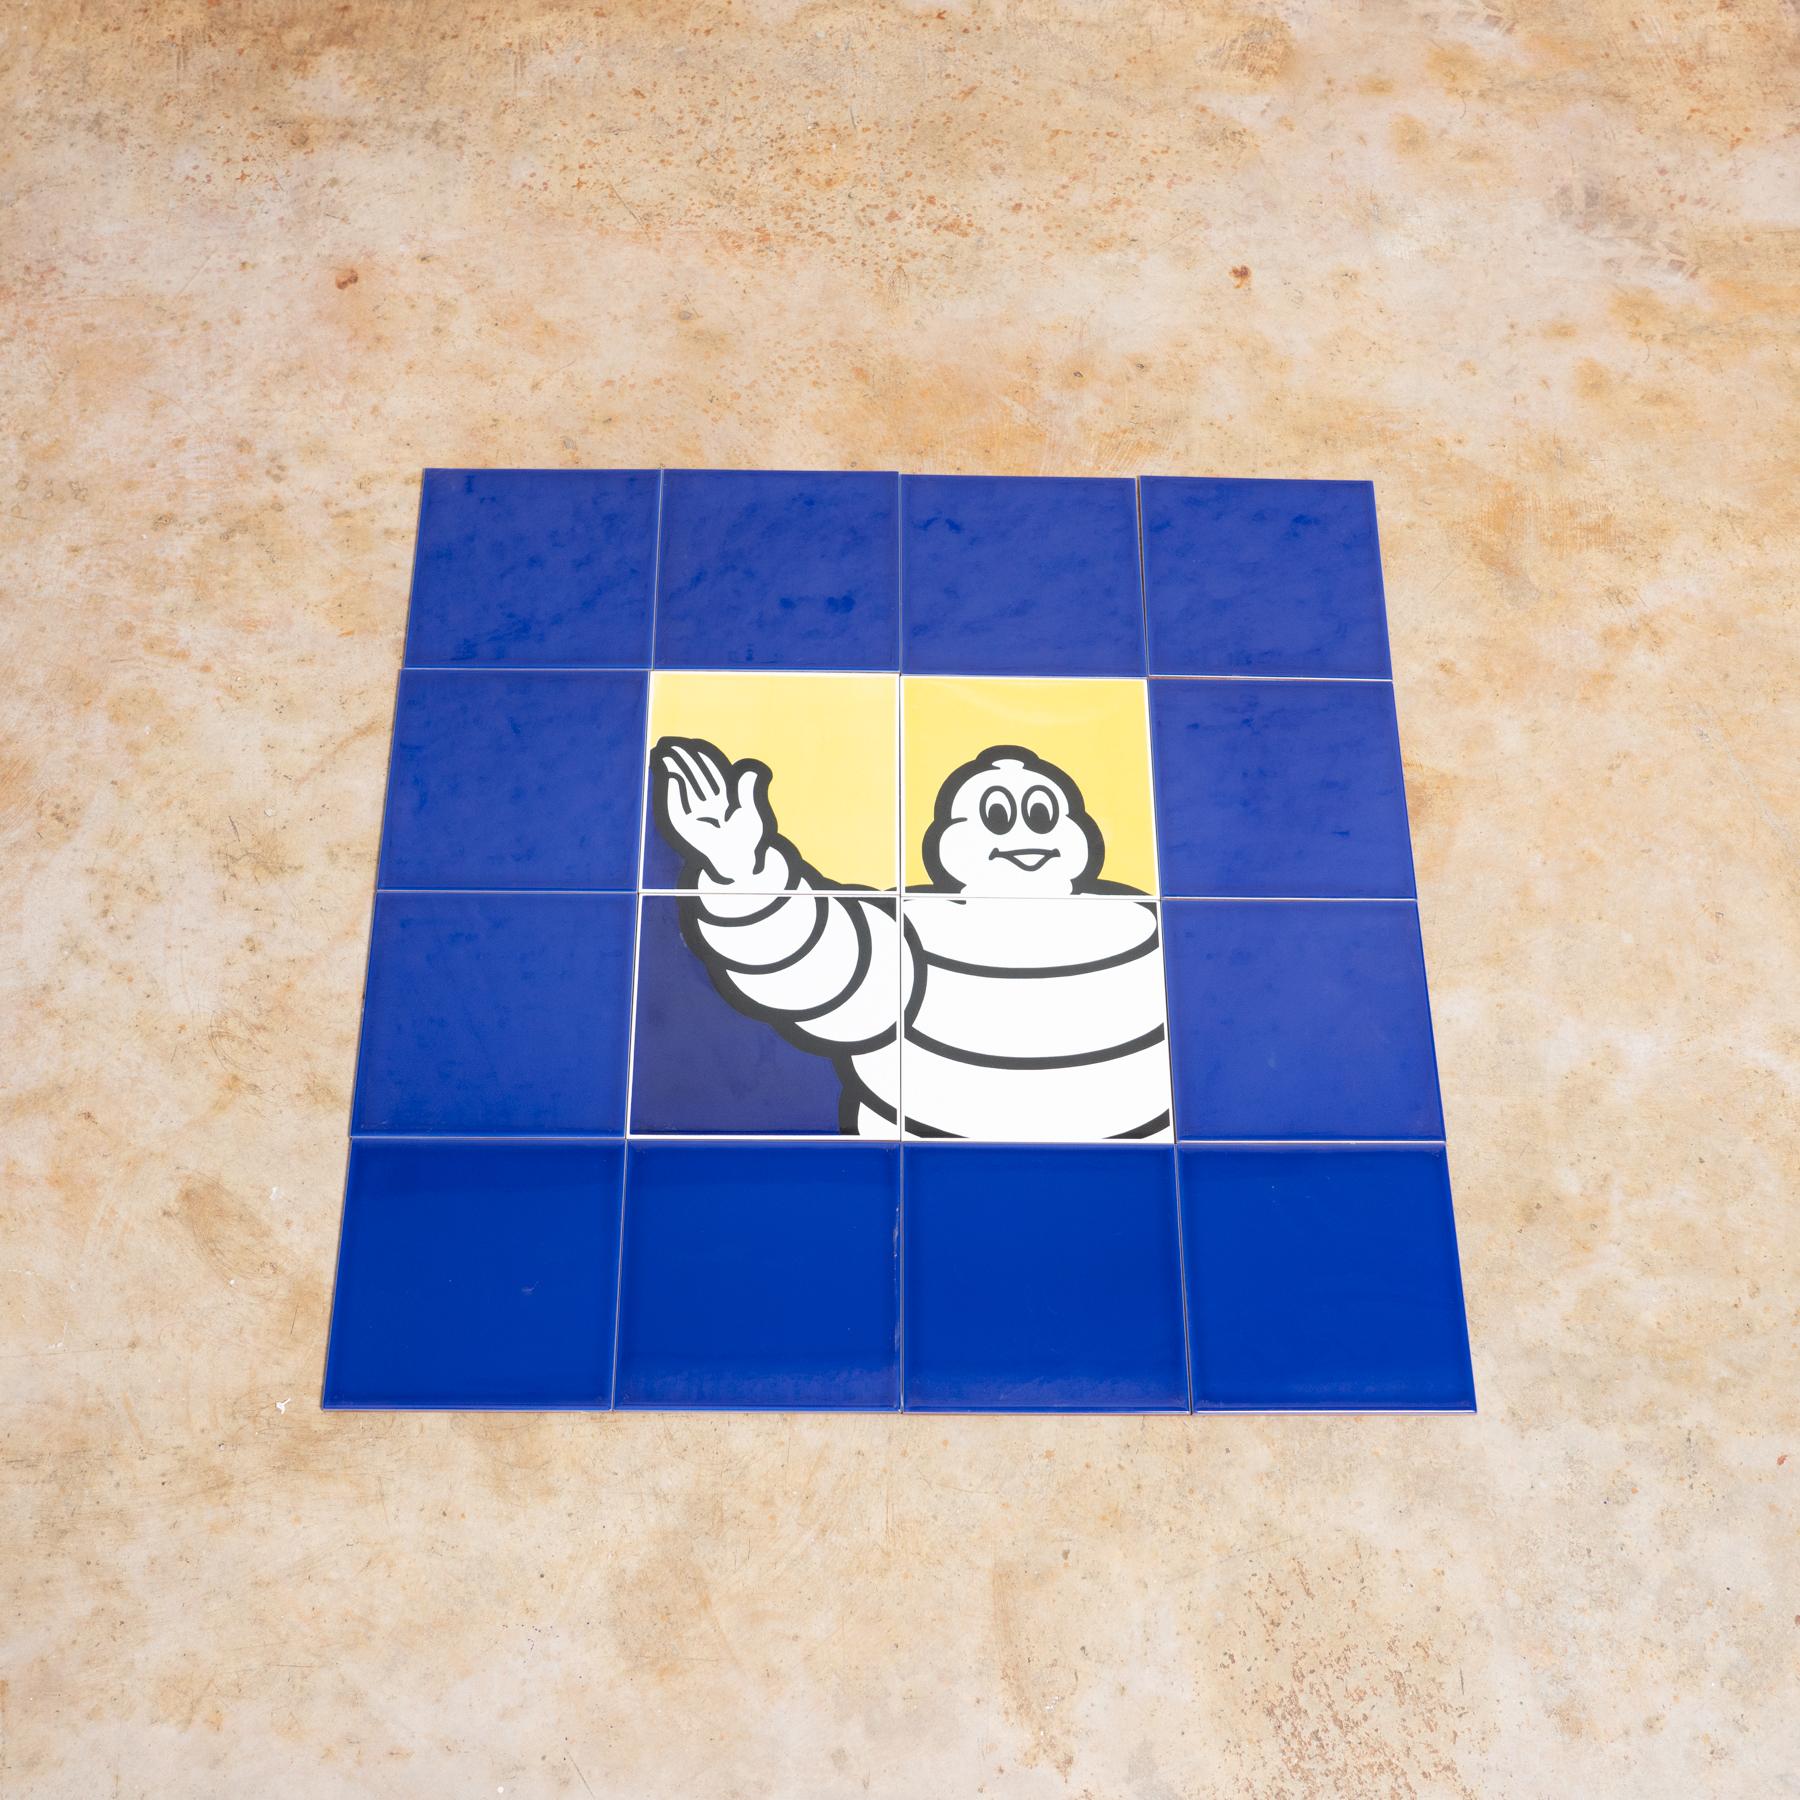 Set of sixteen Michelin Man tiles, by unknwon manufacturer from Spain, circa 1960.

In original condition, with minor wear consistent with age and use, preserving a beautiful patina.

Materials:
Ceramic.

